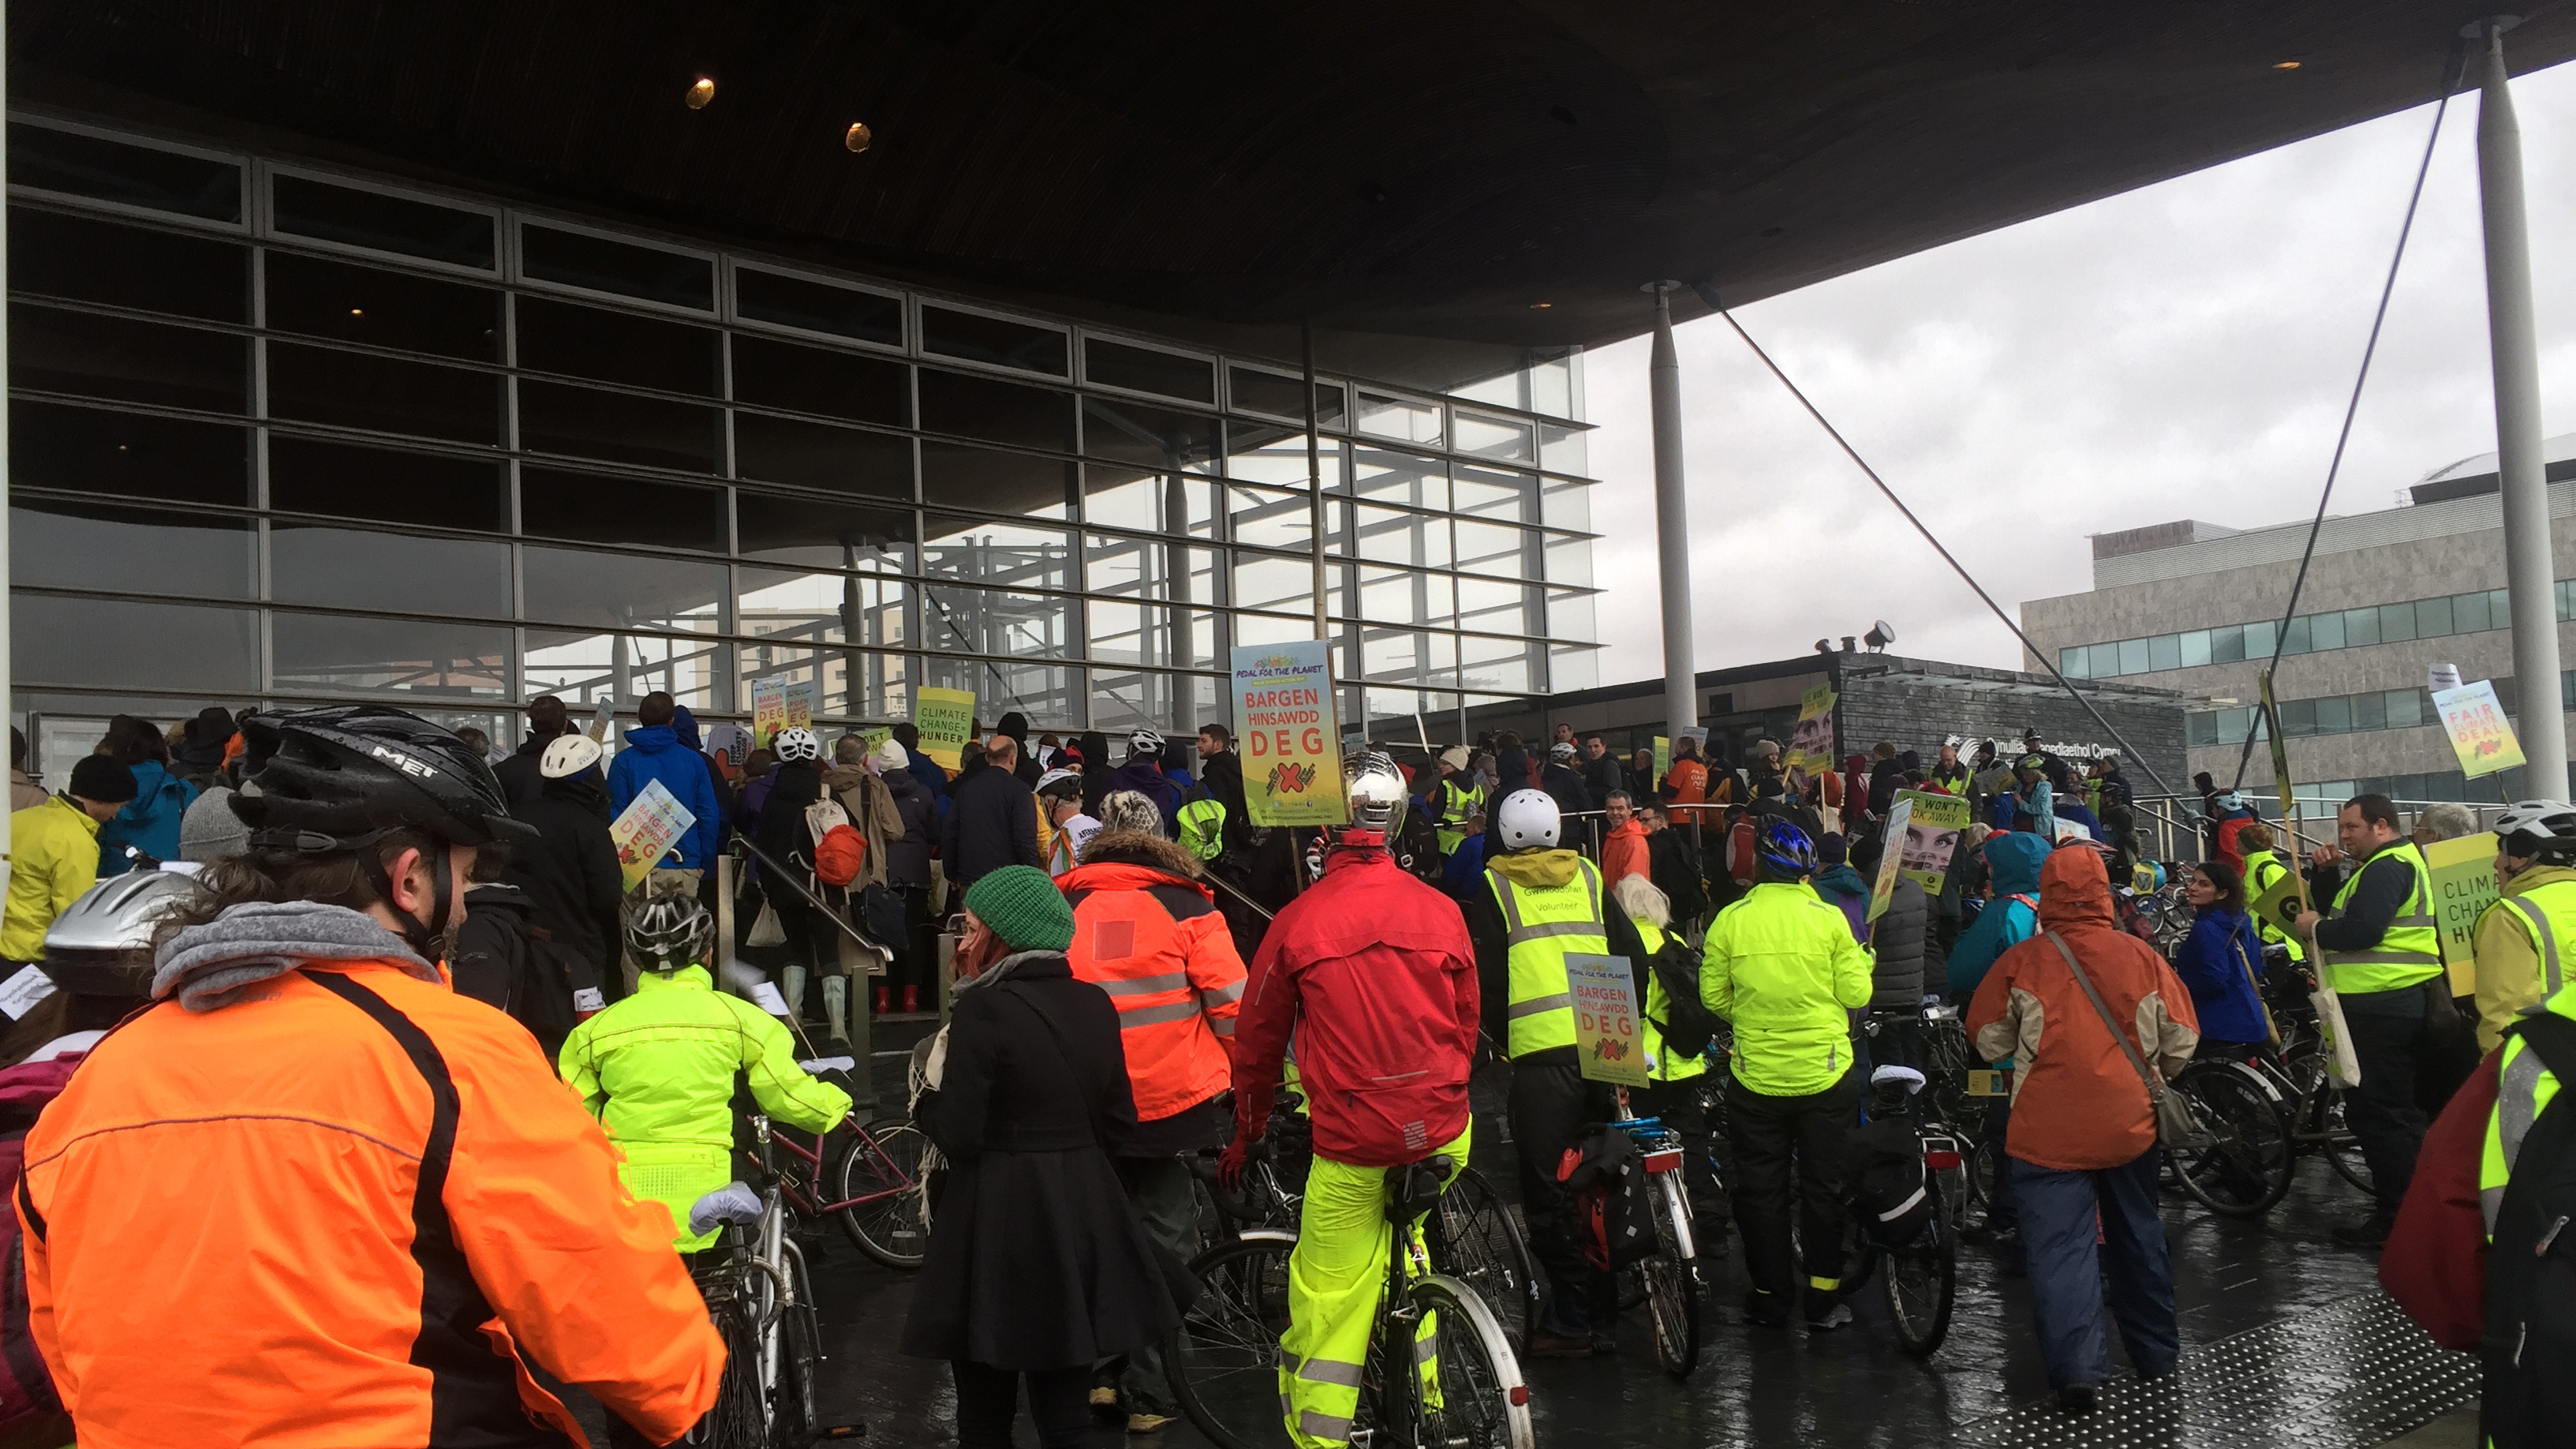 Hundreds people gathered at Cardiff Bay despite the terrible weather at 2 pm on 28 November 